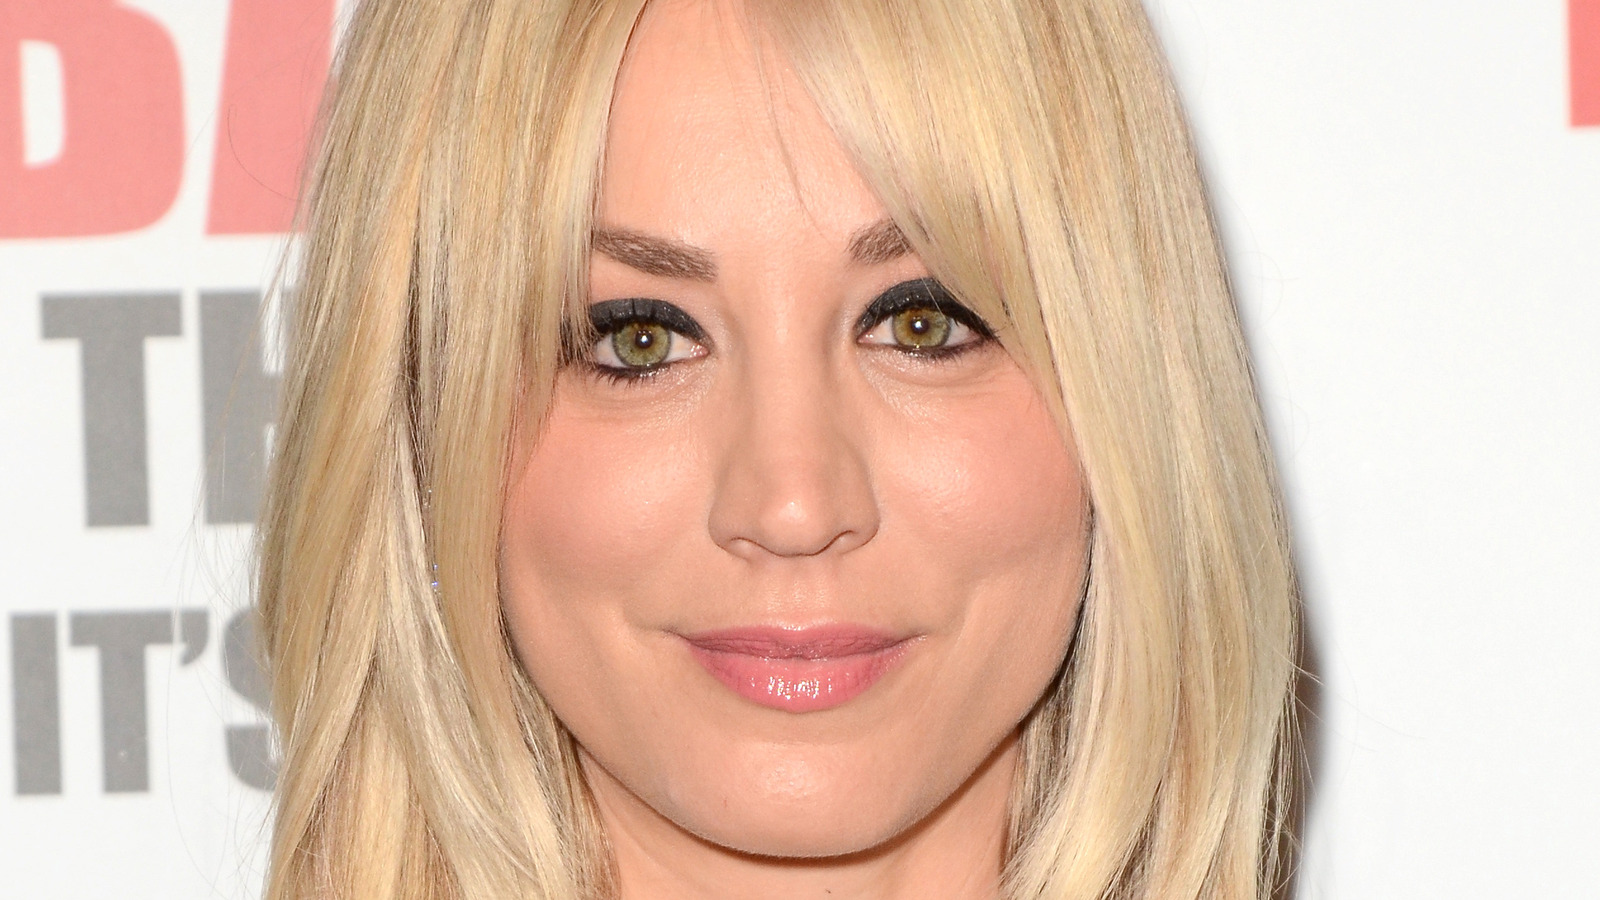 Kaley Cuoco's 7 Best And 7 Worst TV Roles Ranked